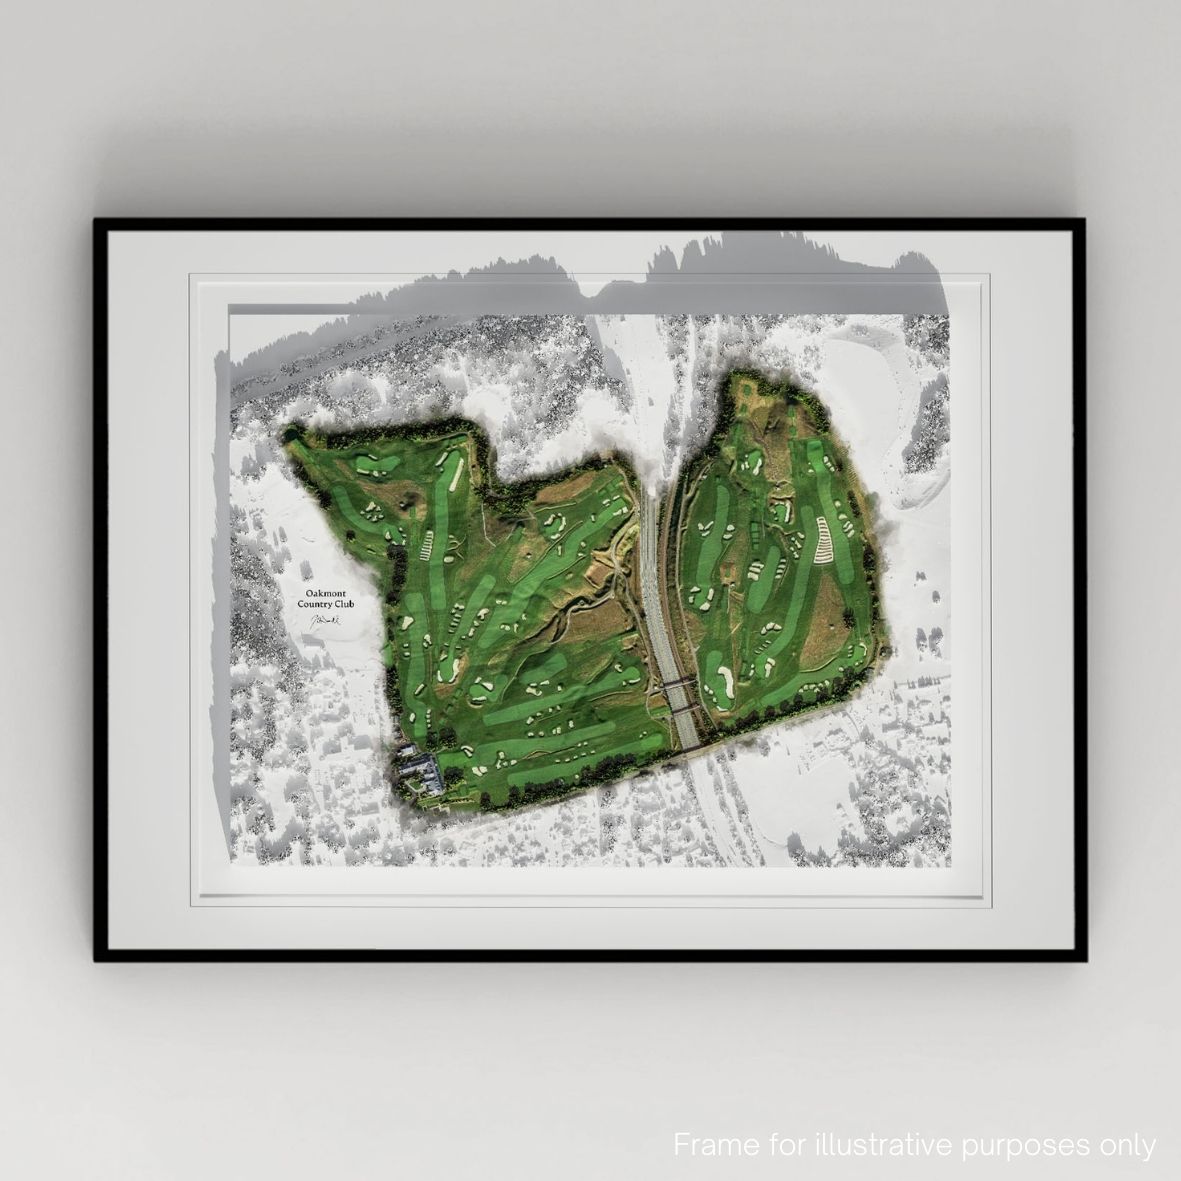 framed print of oakmont country club by joe mcdonnell